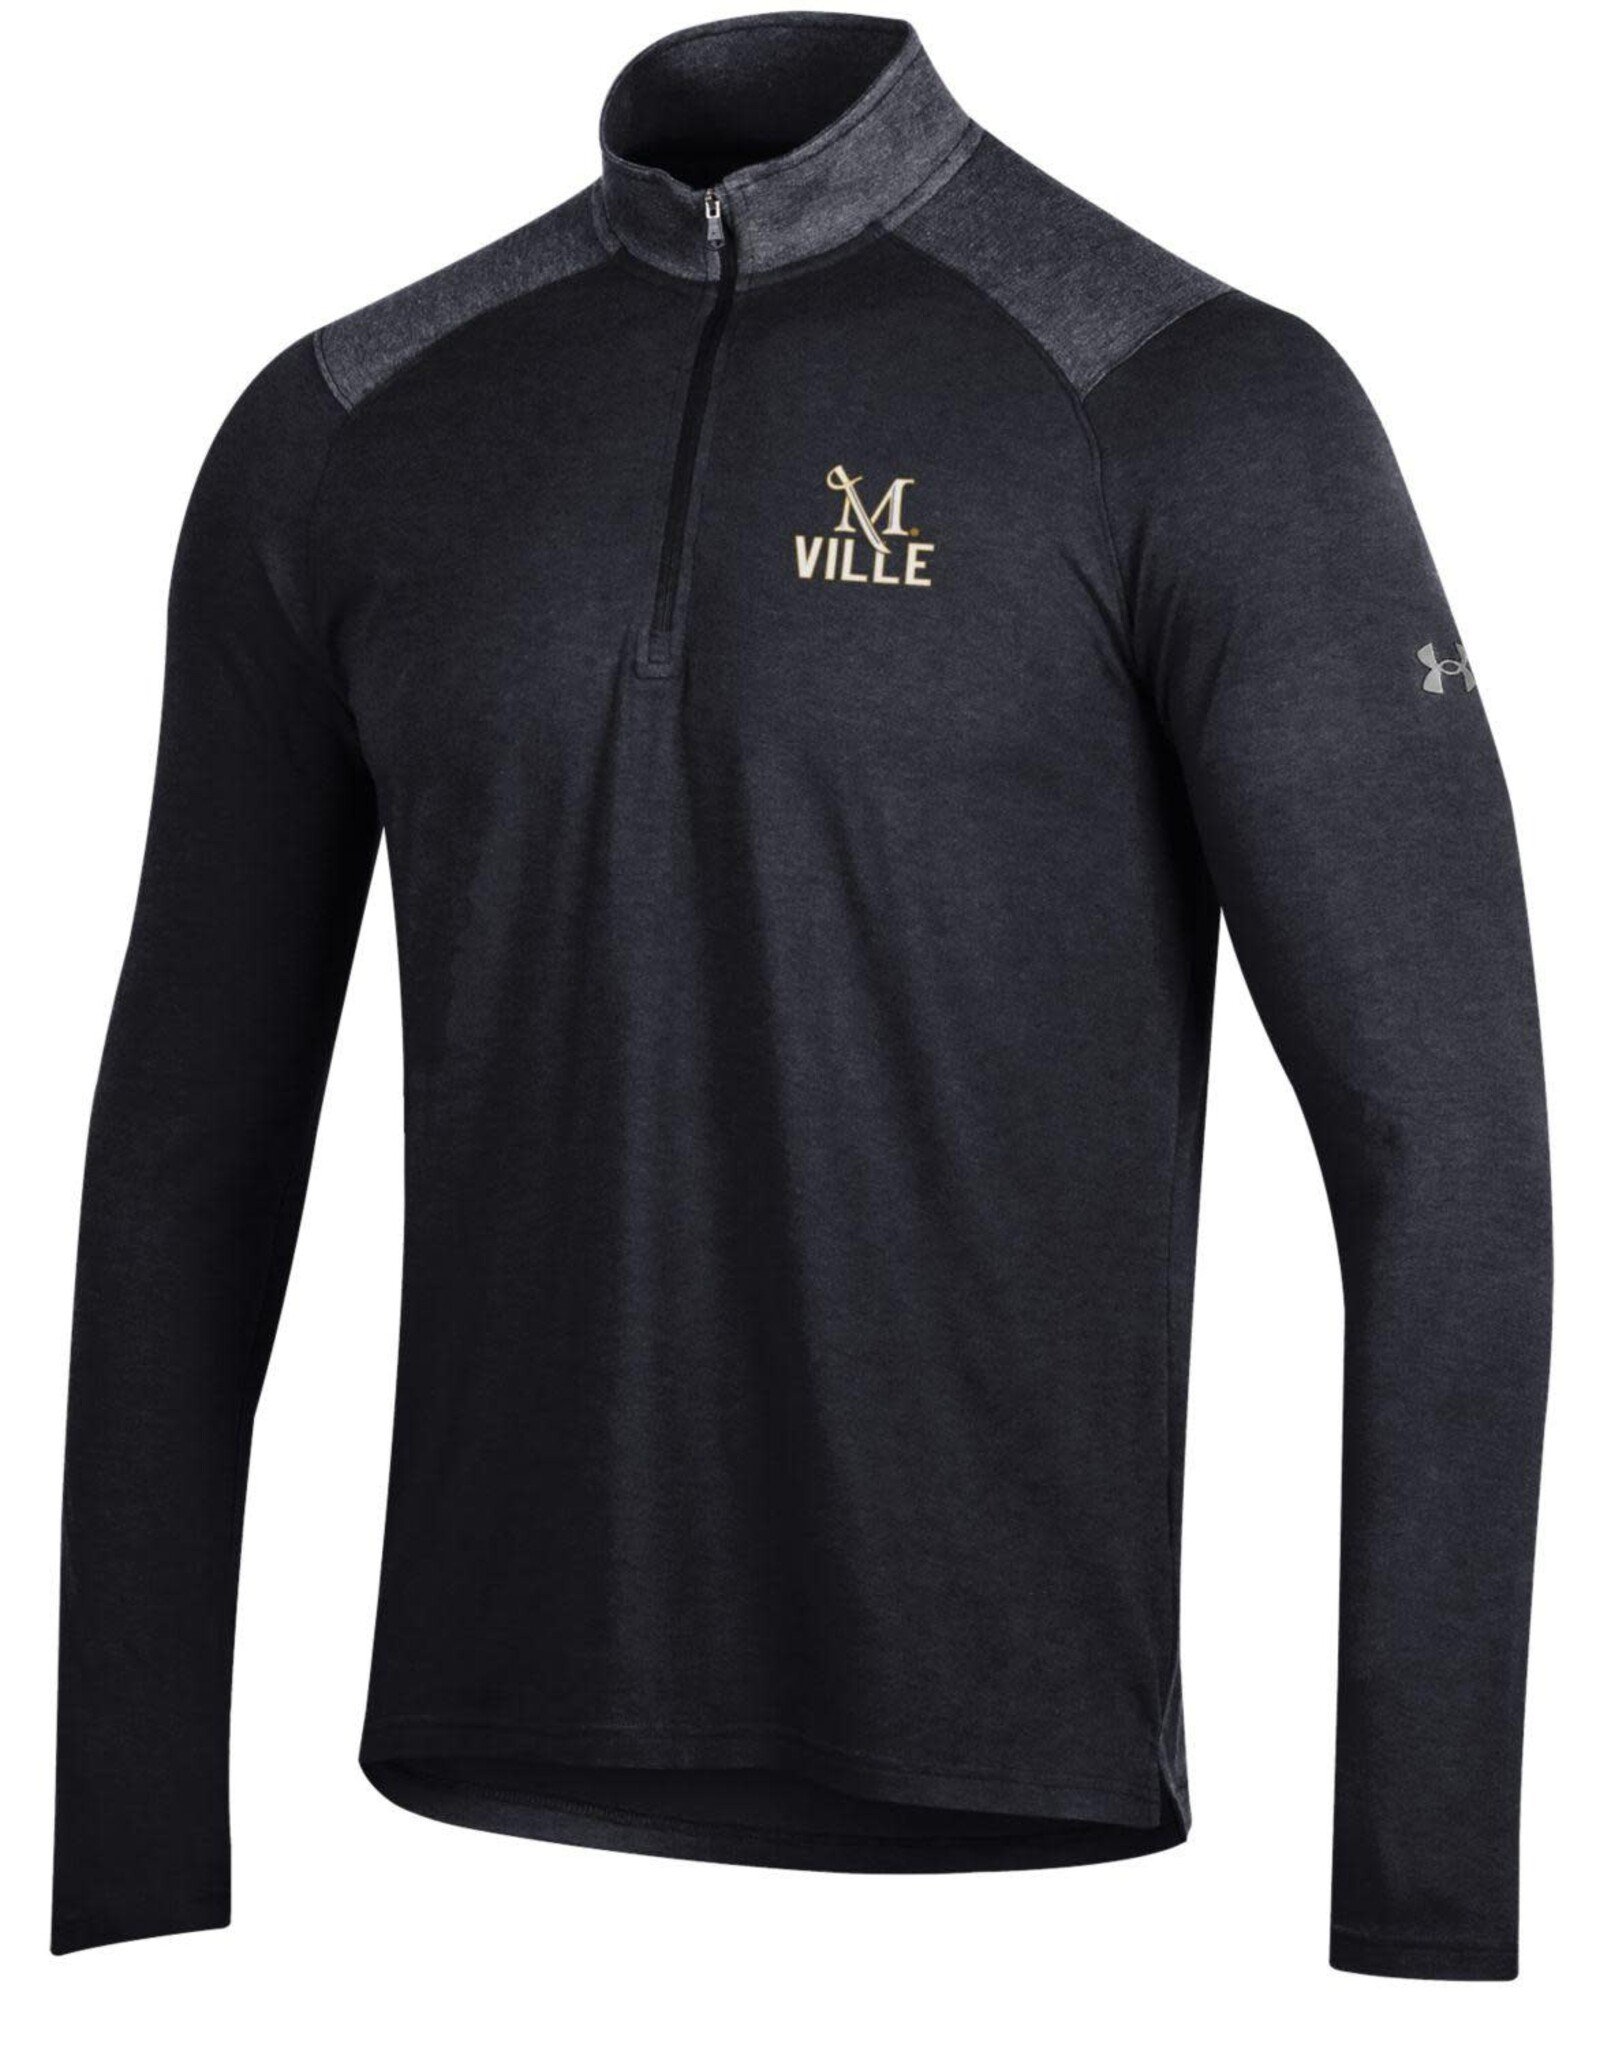  Under Armour Mens Qualifier Fleece Anorak Royal SM : Clothing,  Shoes & Jewelry